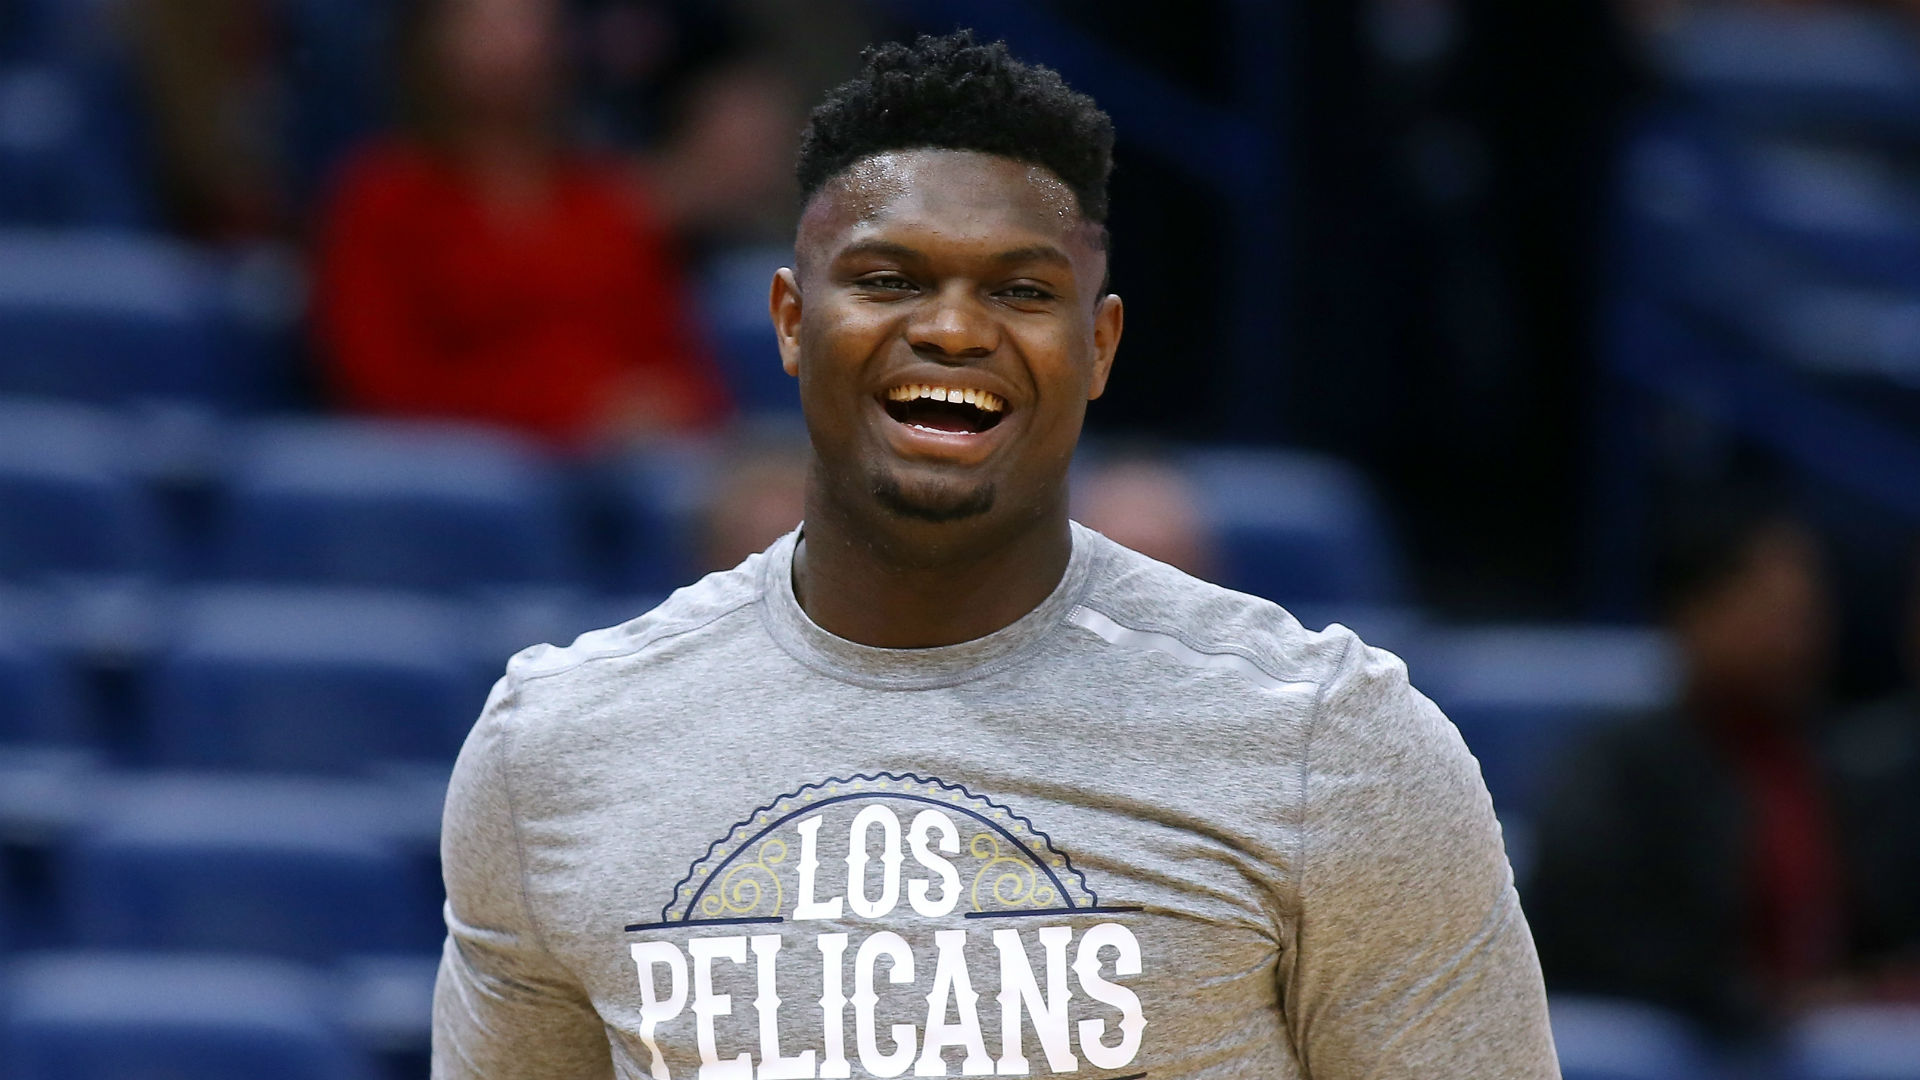 Pelicans star Zion Williamson to continue rehabilitation on injured foot away from the team